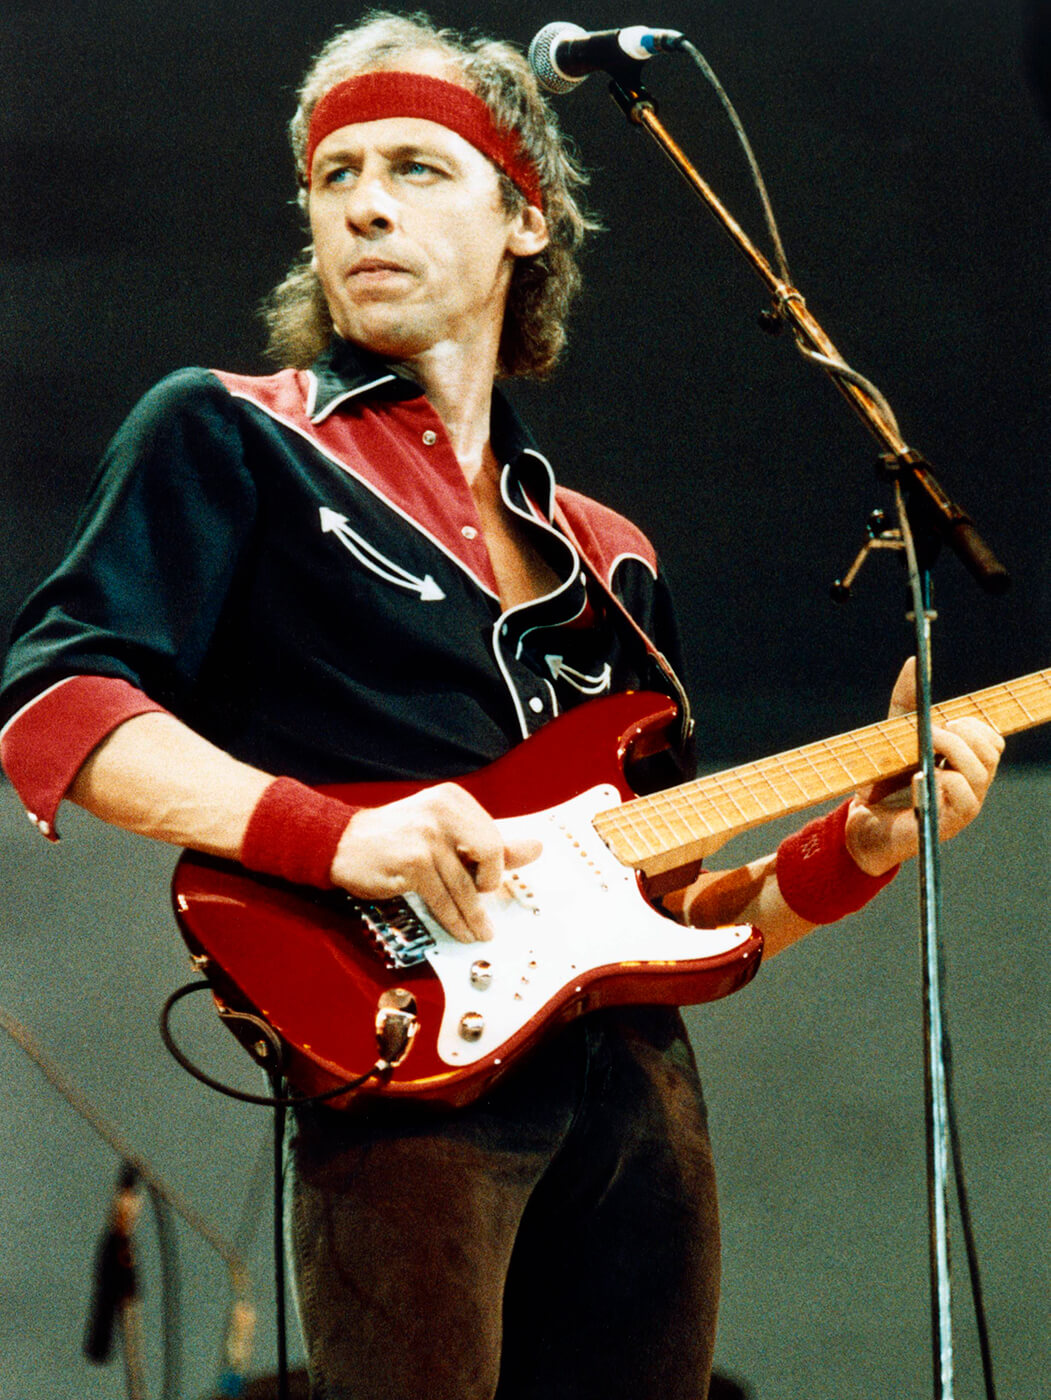 Young Mark Knopfler playingred strat